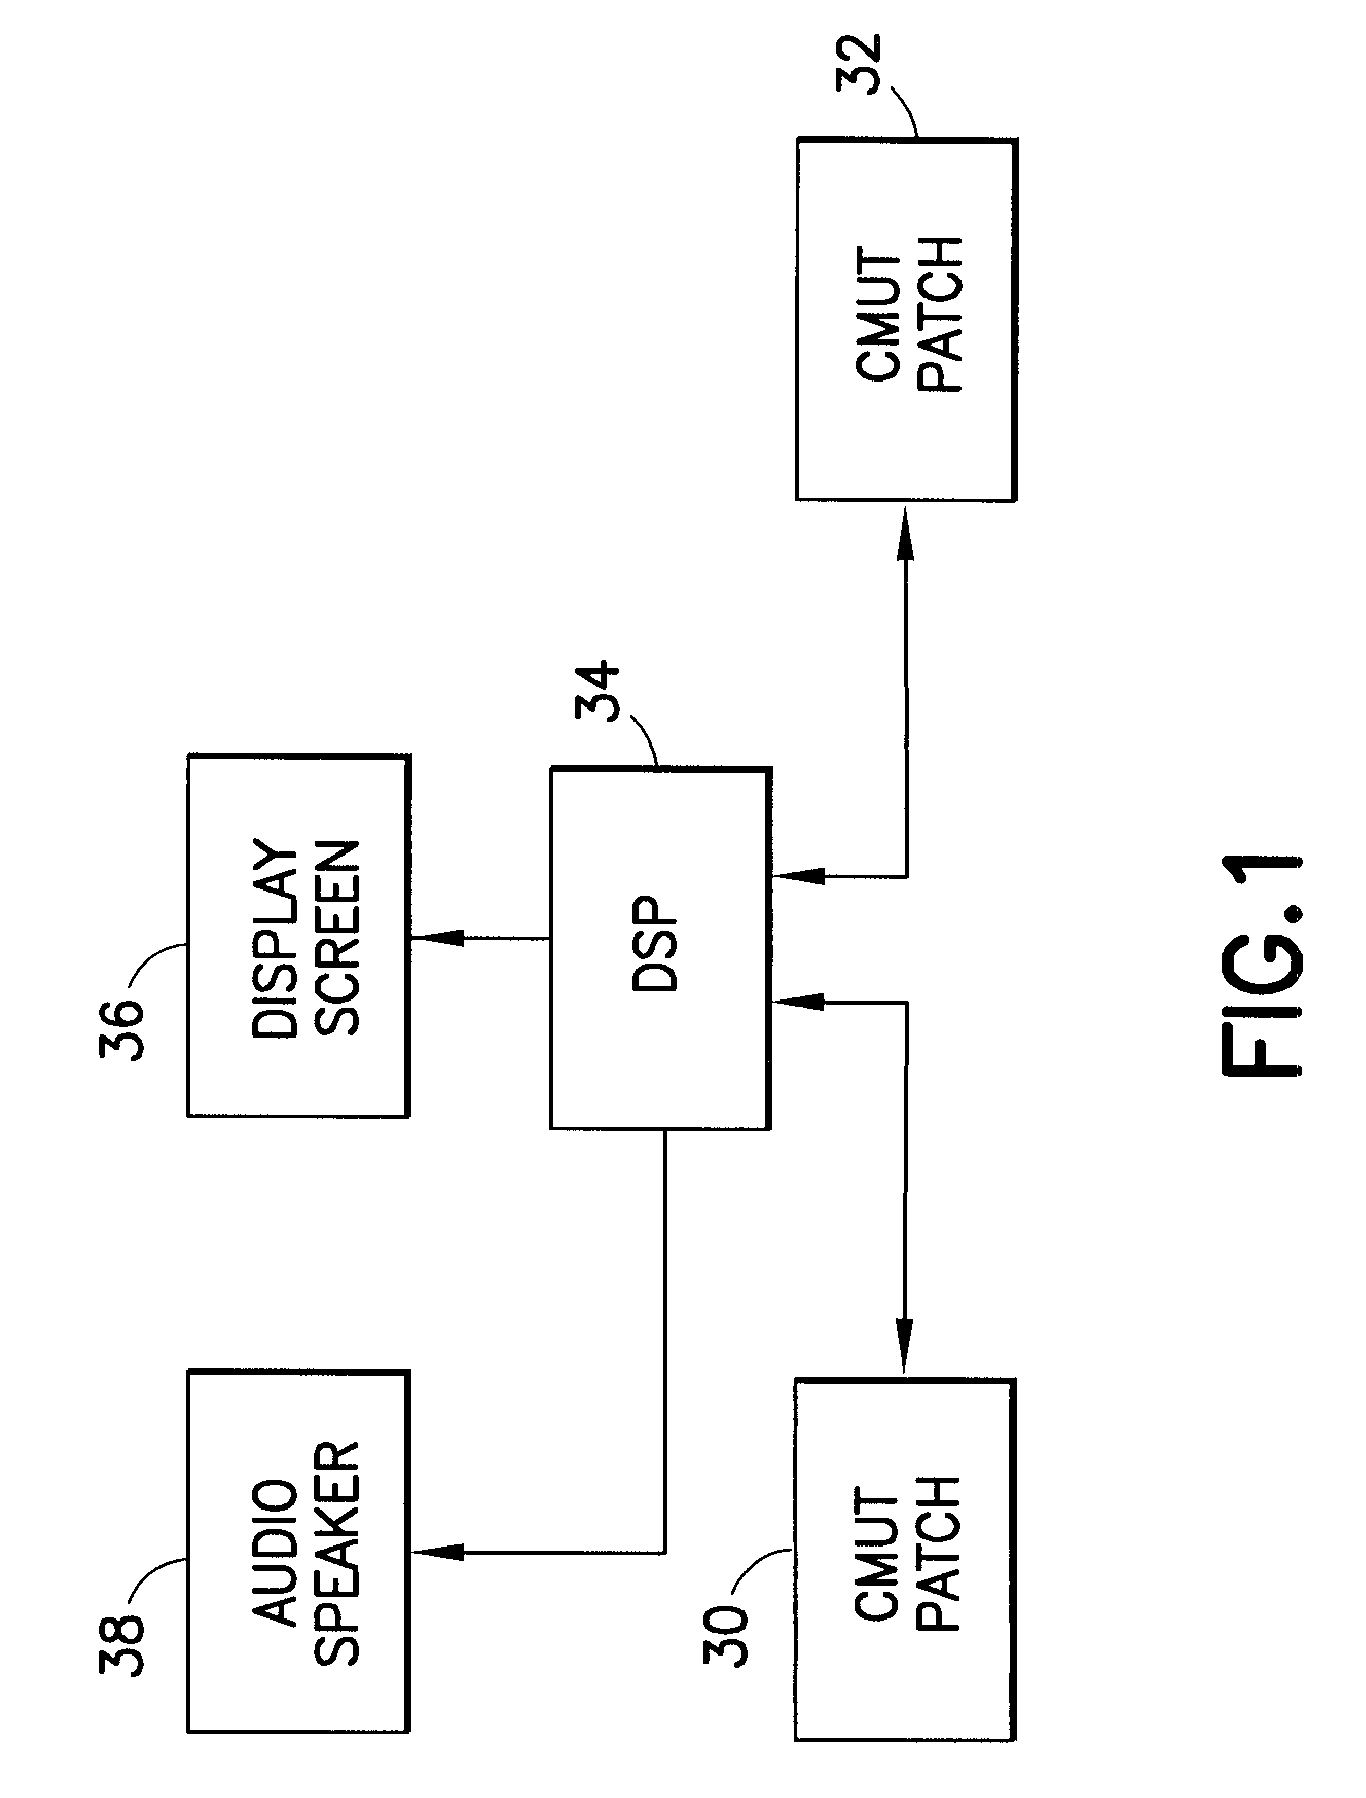 Method and apparatus for non-invasive ultrasonic fetal heart rate monitoring